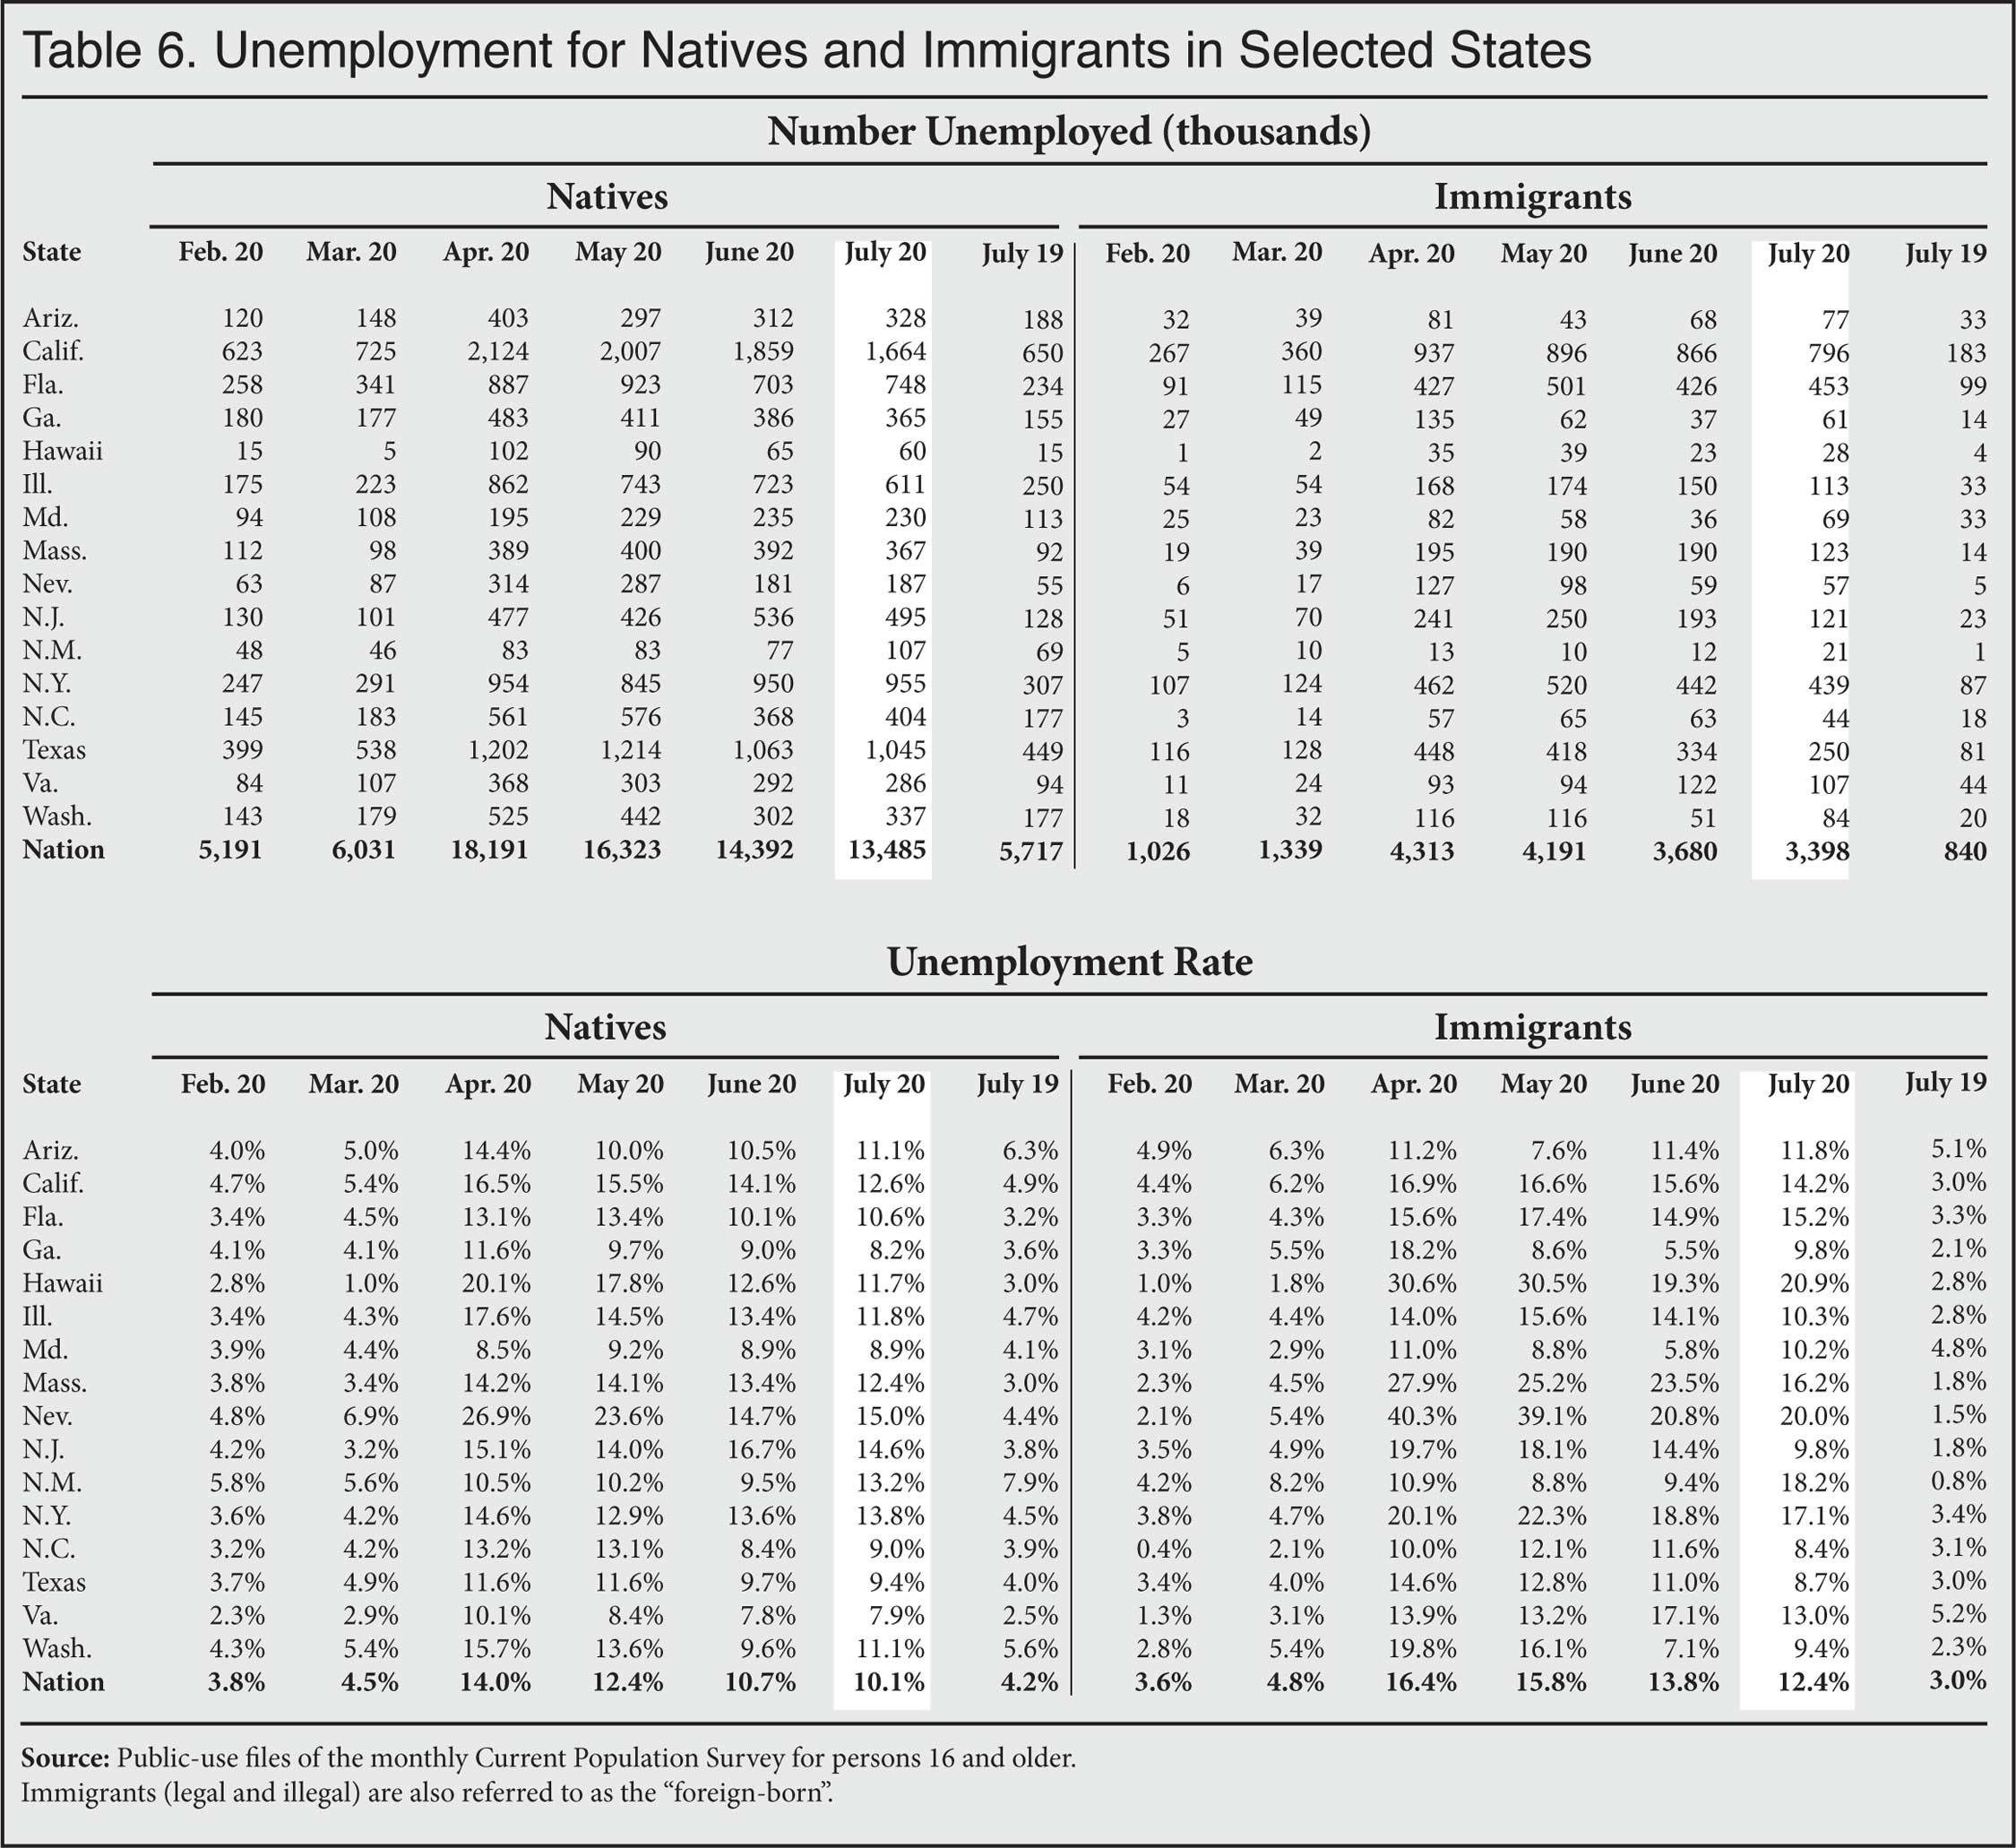 Graph: Unemployment for Natives and Immigrants, by Selected States